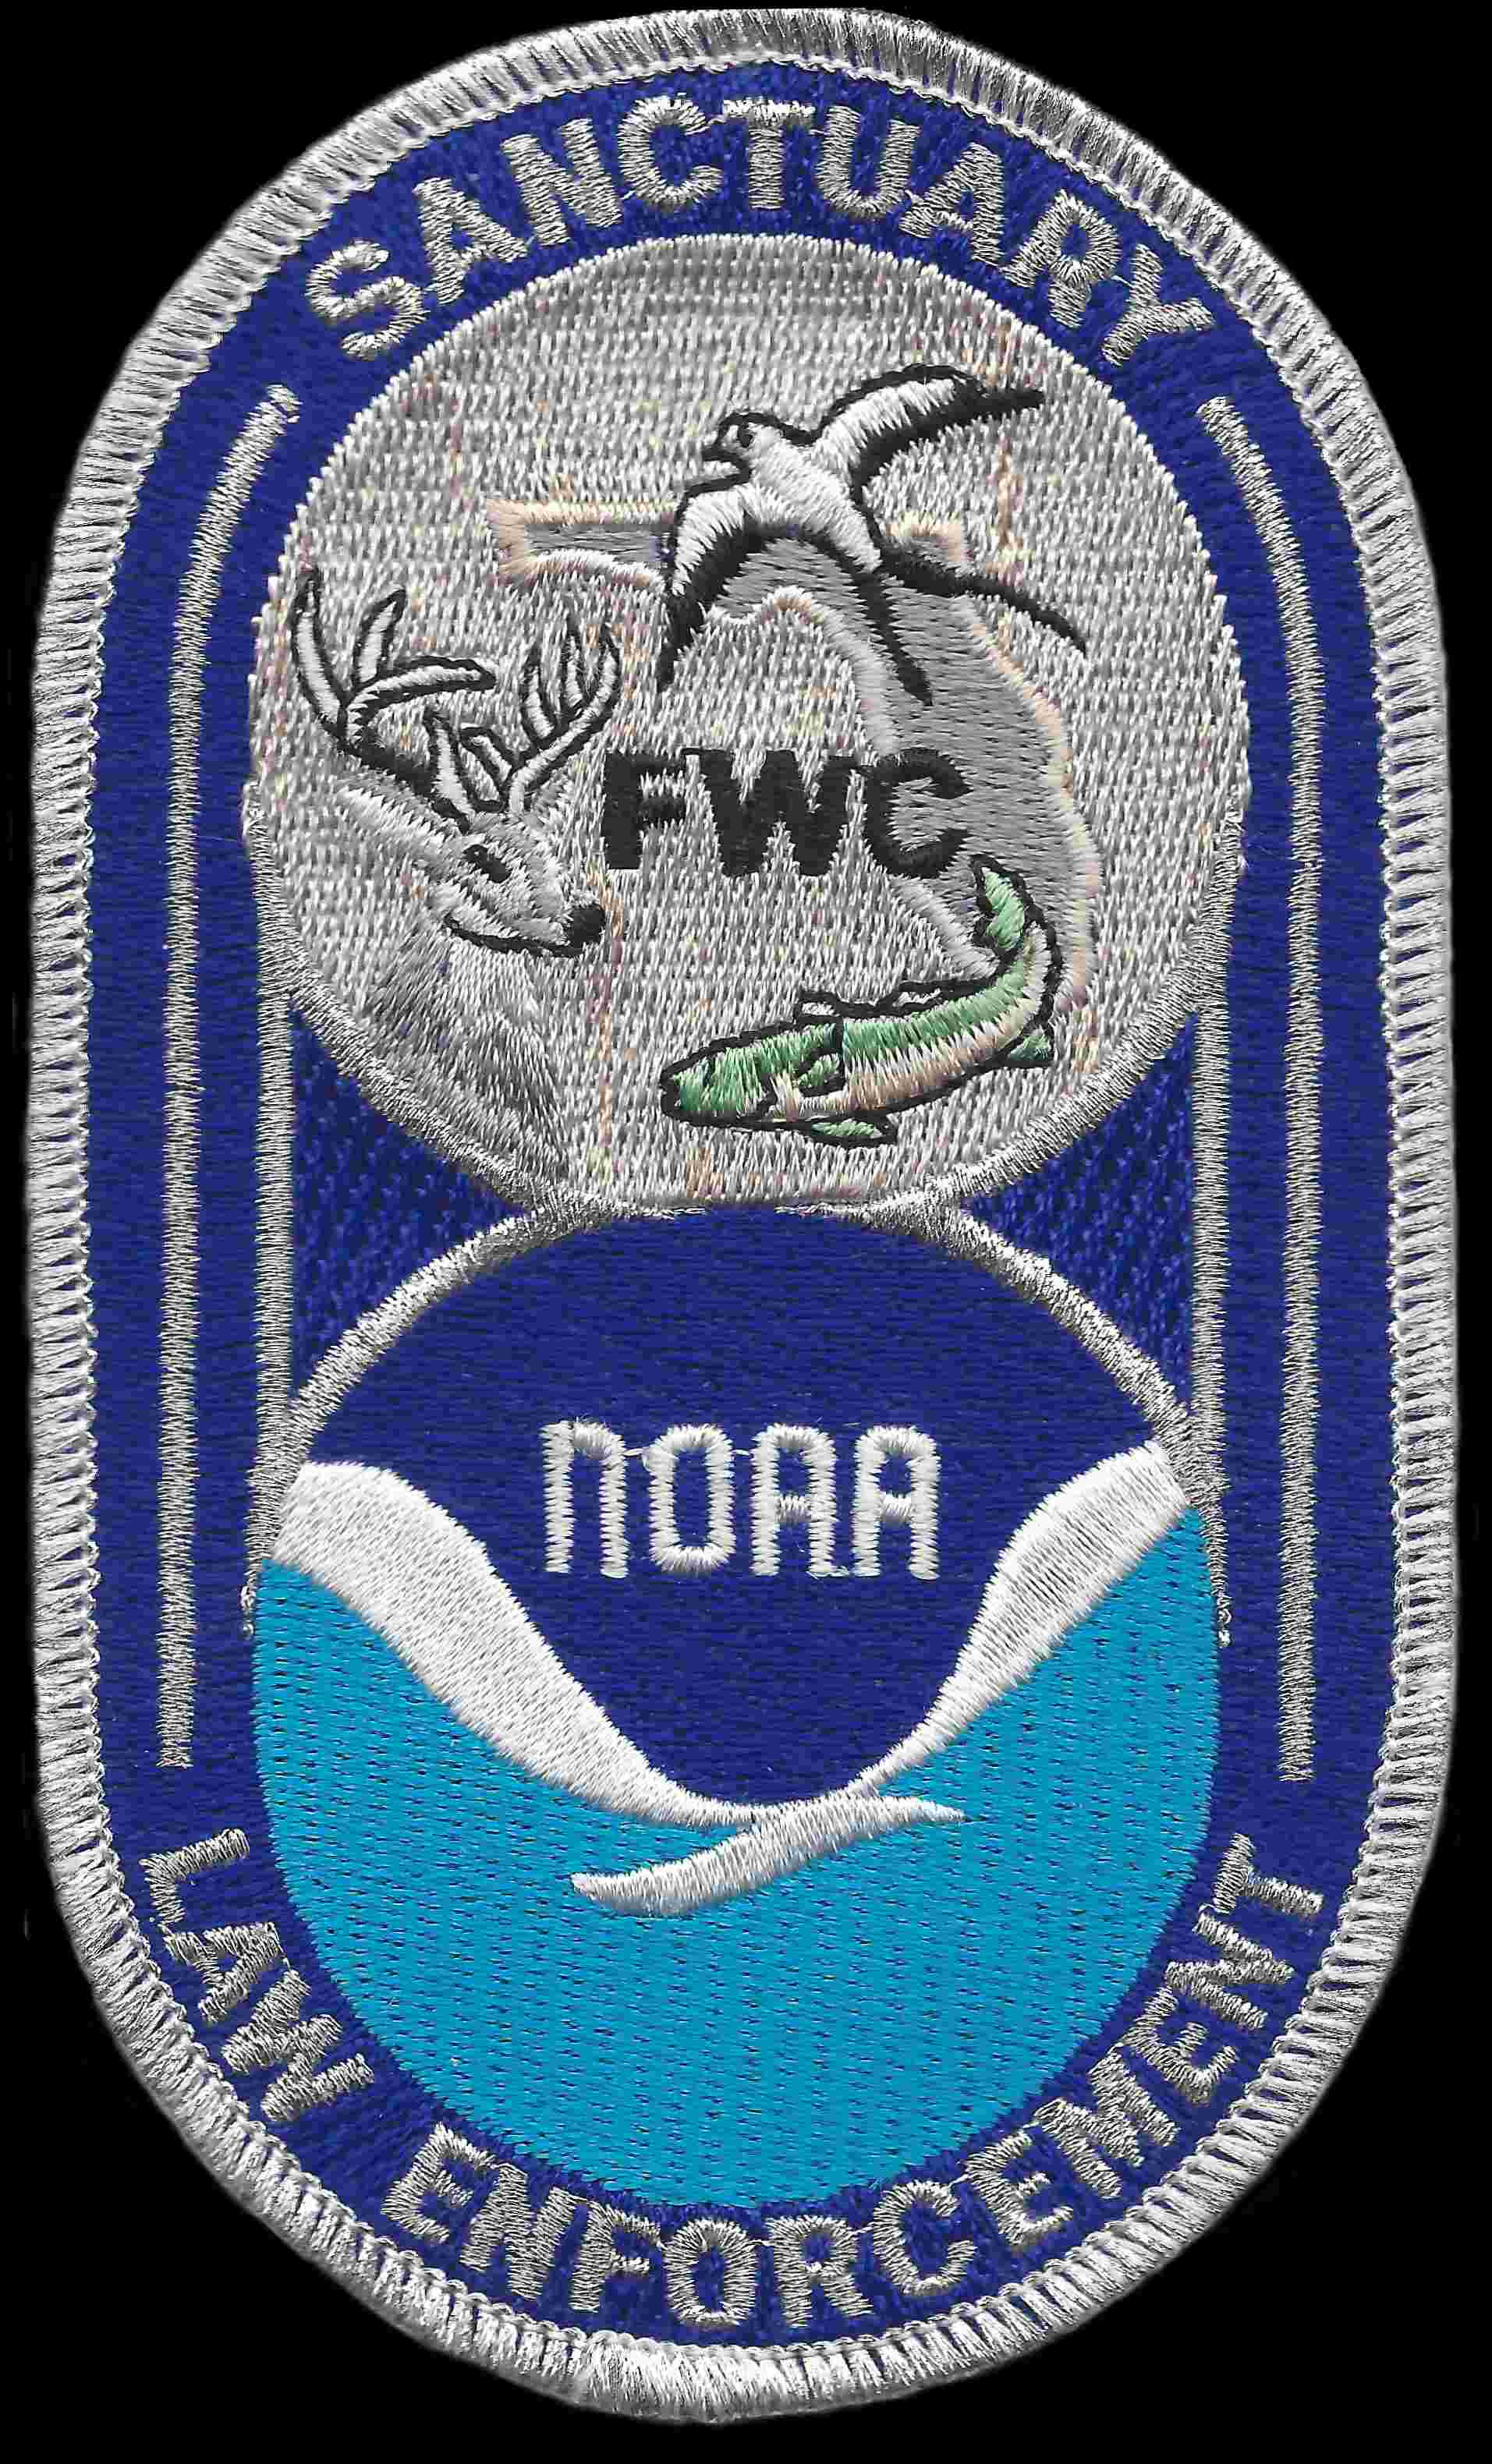 Florida Fish and Wildlife Commission Patch